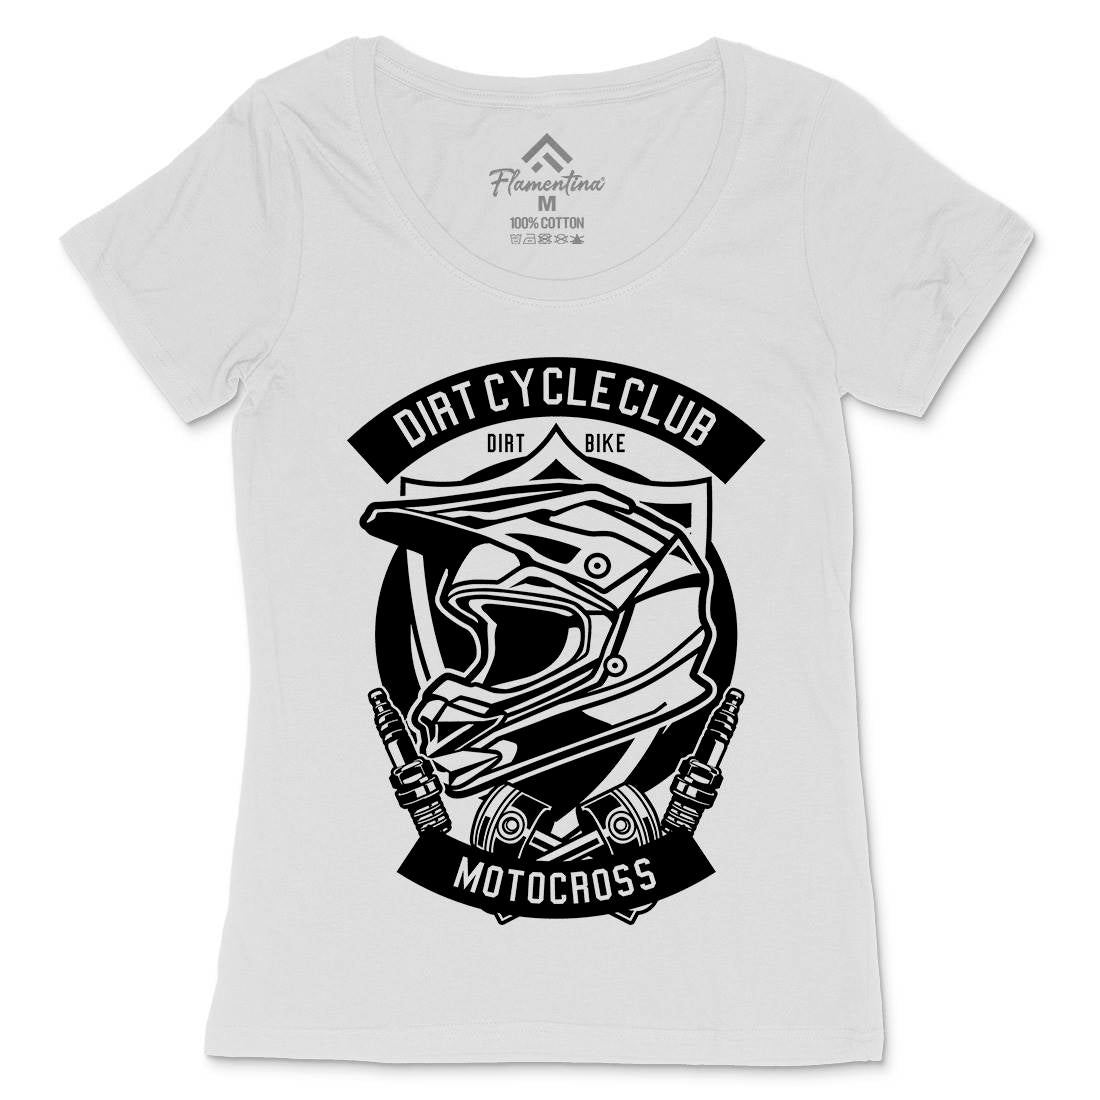 Dirty Cycle Club Womens Scoop Neck T-Shirt Motorcycles B532